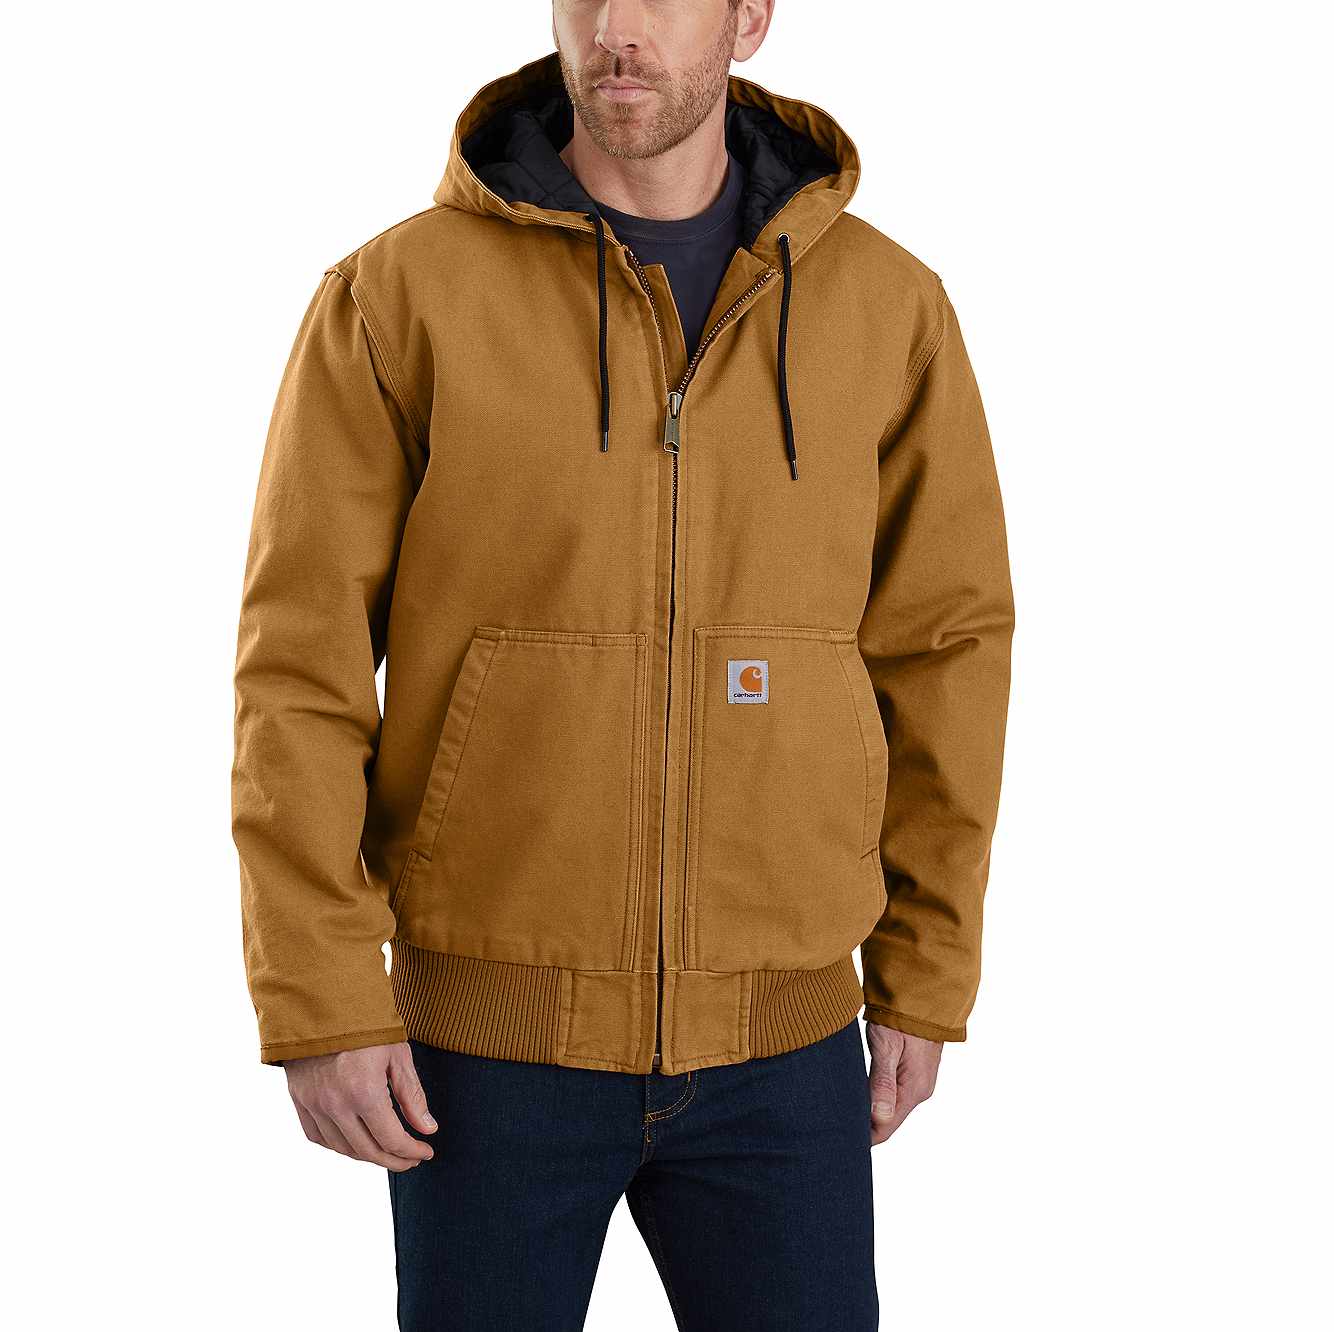 Carhartt 104050-BRN Washed Duck Insulated Active Jacket